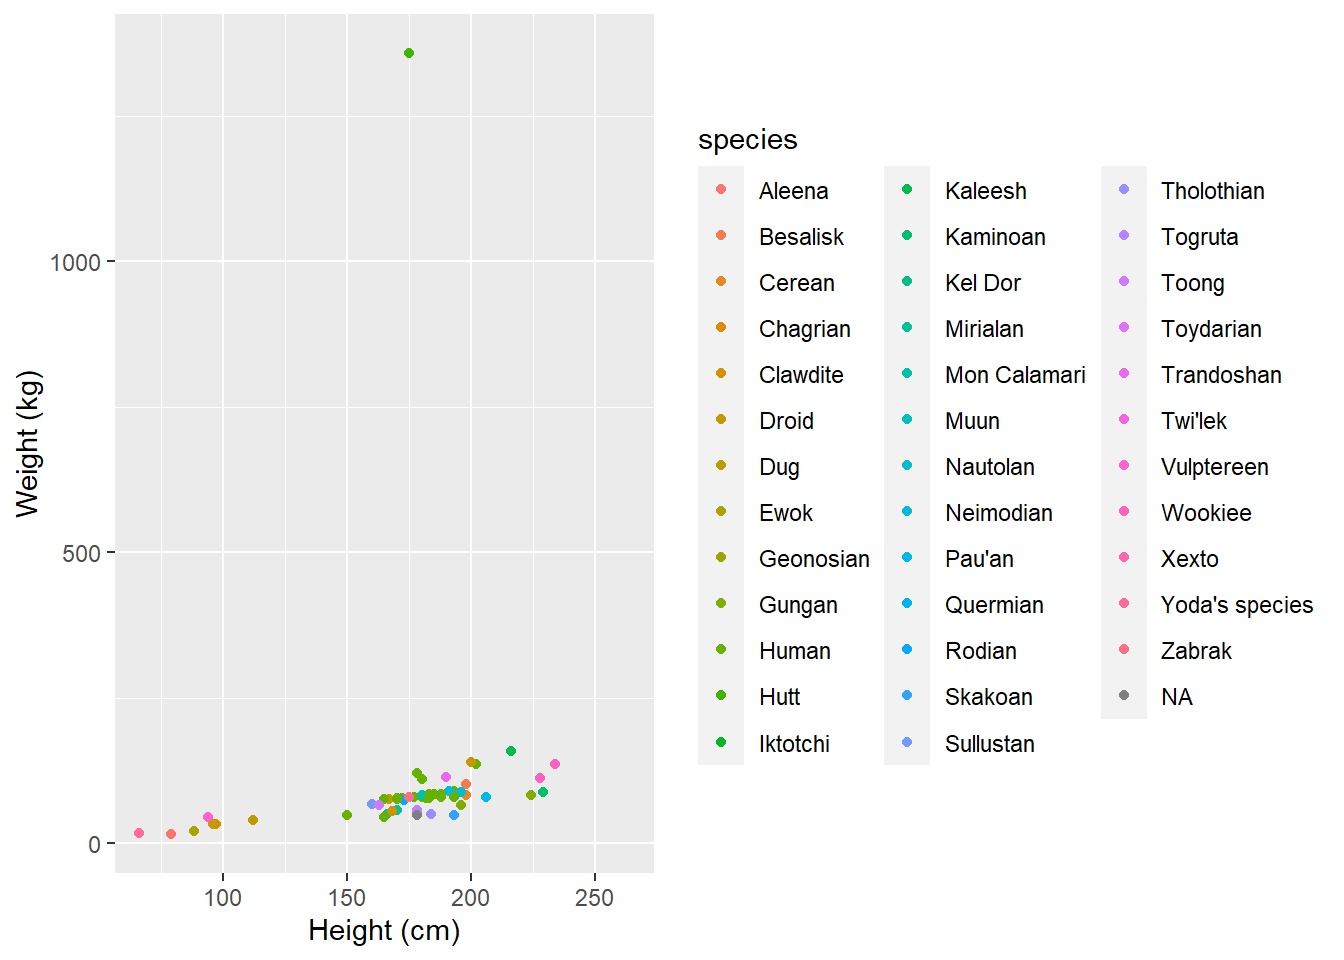 Average height (cm) of Star Wars characters by weight (kg) and species